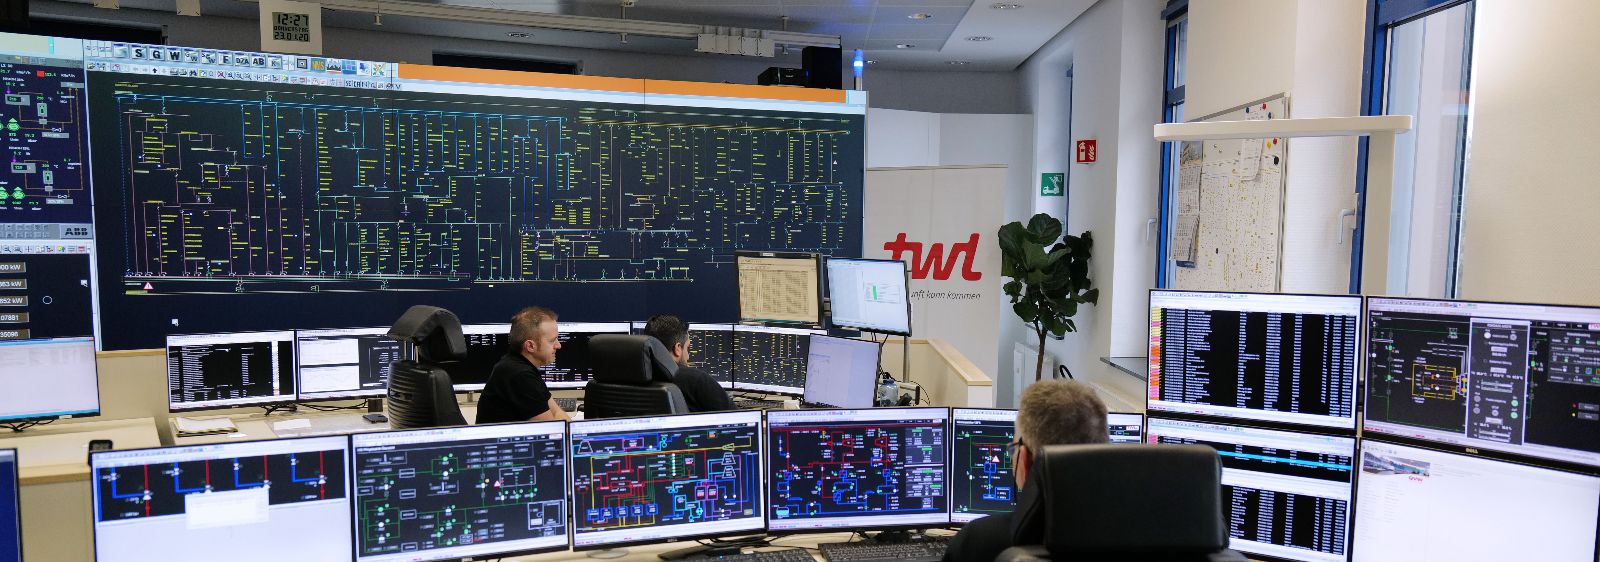 Control room of the Ludwigshafen district heating plant